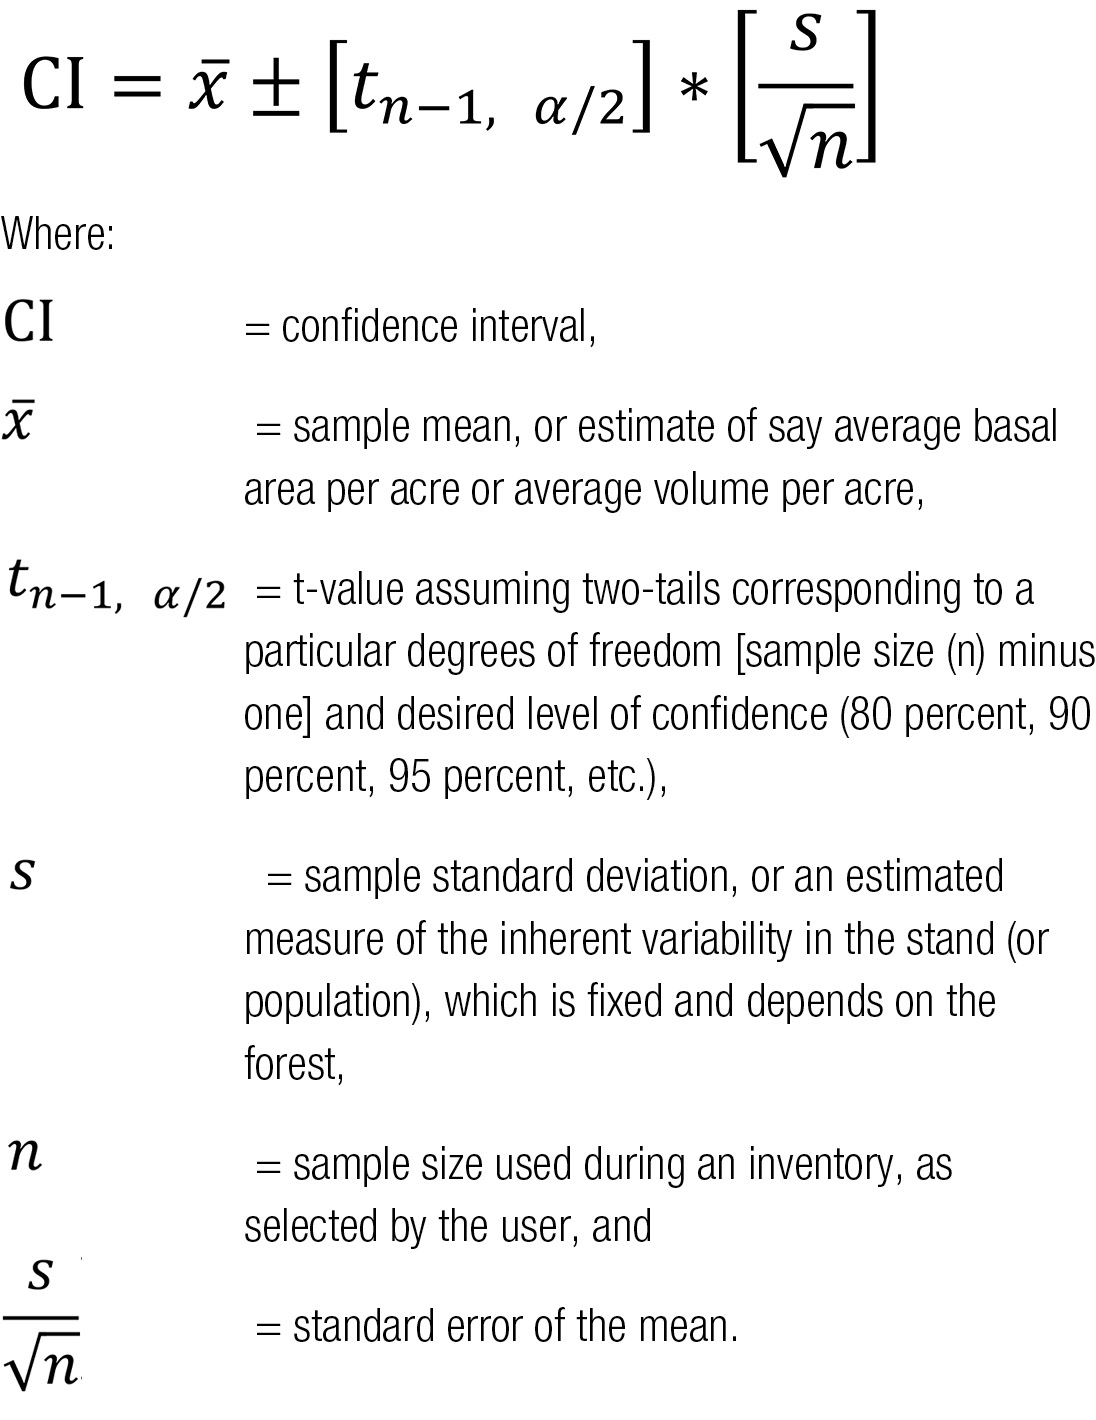 A confidence interval (CI) is a mathematical formula that is a function of the sample mean, or average value, represented by x-bar, and then plus/minus an interval.  Where the interval contains a t-value that is a function of the degrees of freedom, which is the sample size, represented by little n, minus 1, and the amount of error divided by 2, where the error is represented by alpha.  We divide alpha by 2 since we want error to account both for overprediction and underprediction, or a two-tailed error, which is also why there is a plus/minus interval.  The t-value is then multiplied by the standard error of the mean, which is the standard deviation, represented by little s, divided by the square root of the sample size, once again represented by little n.